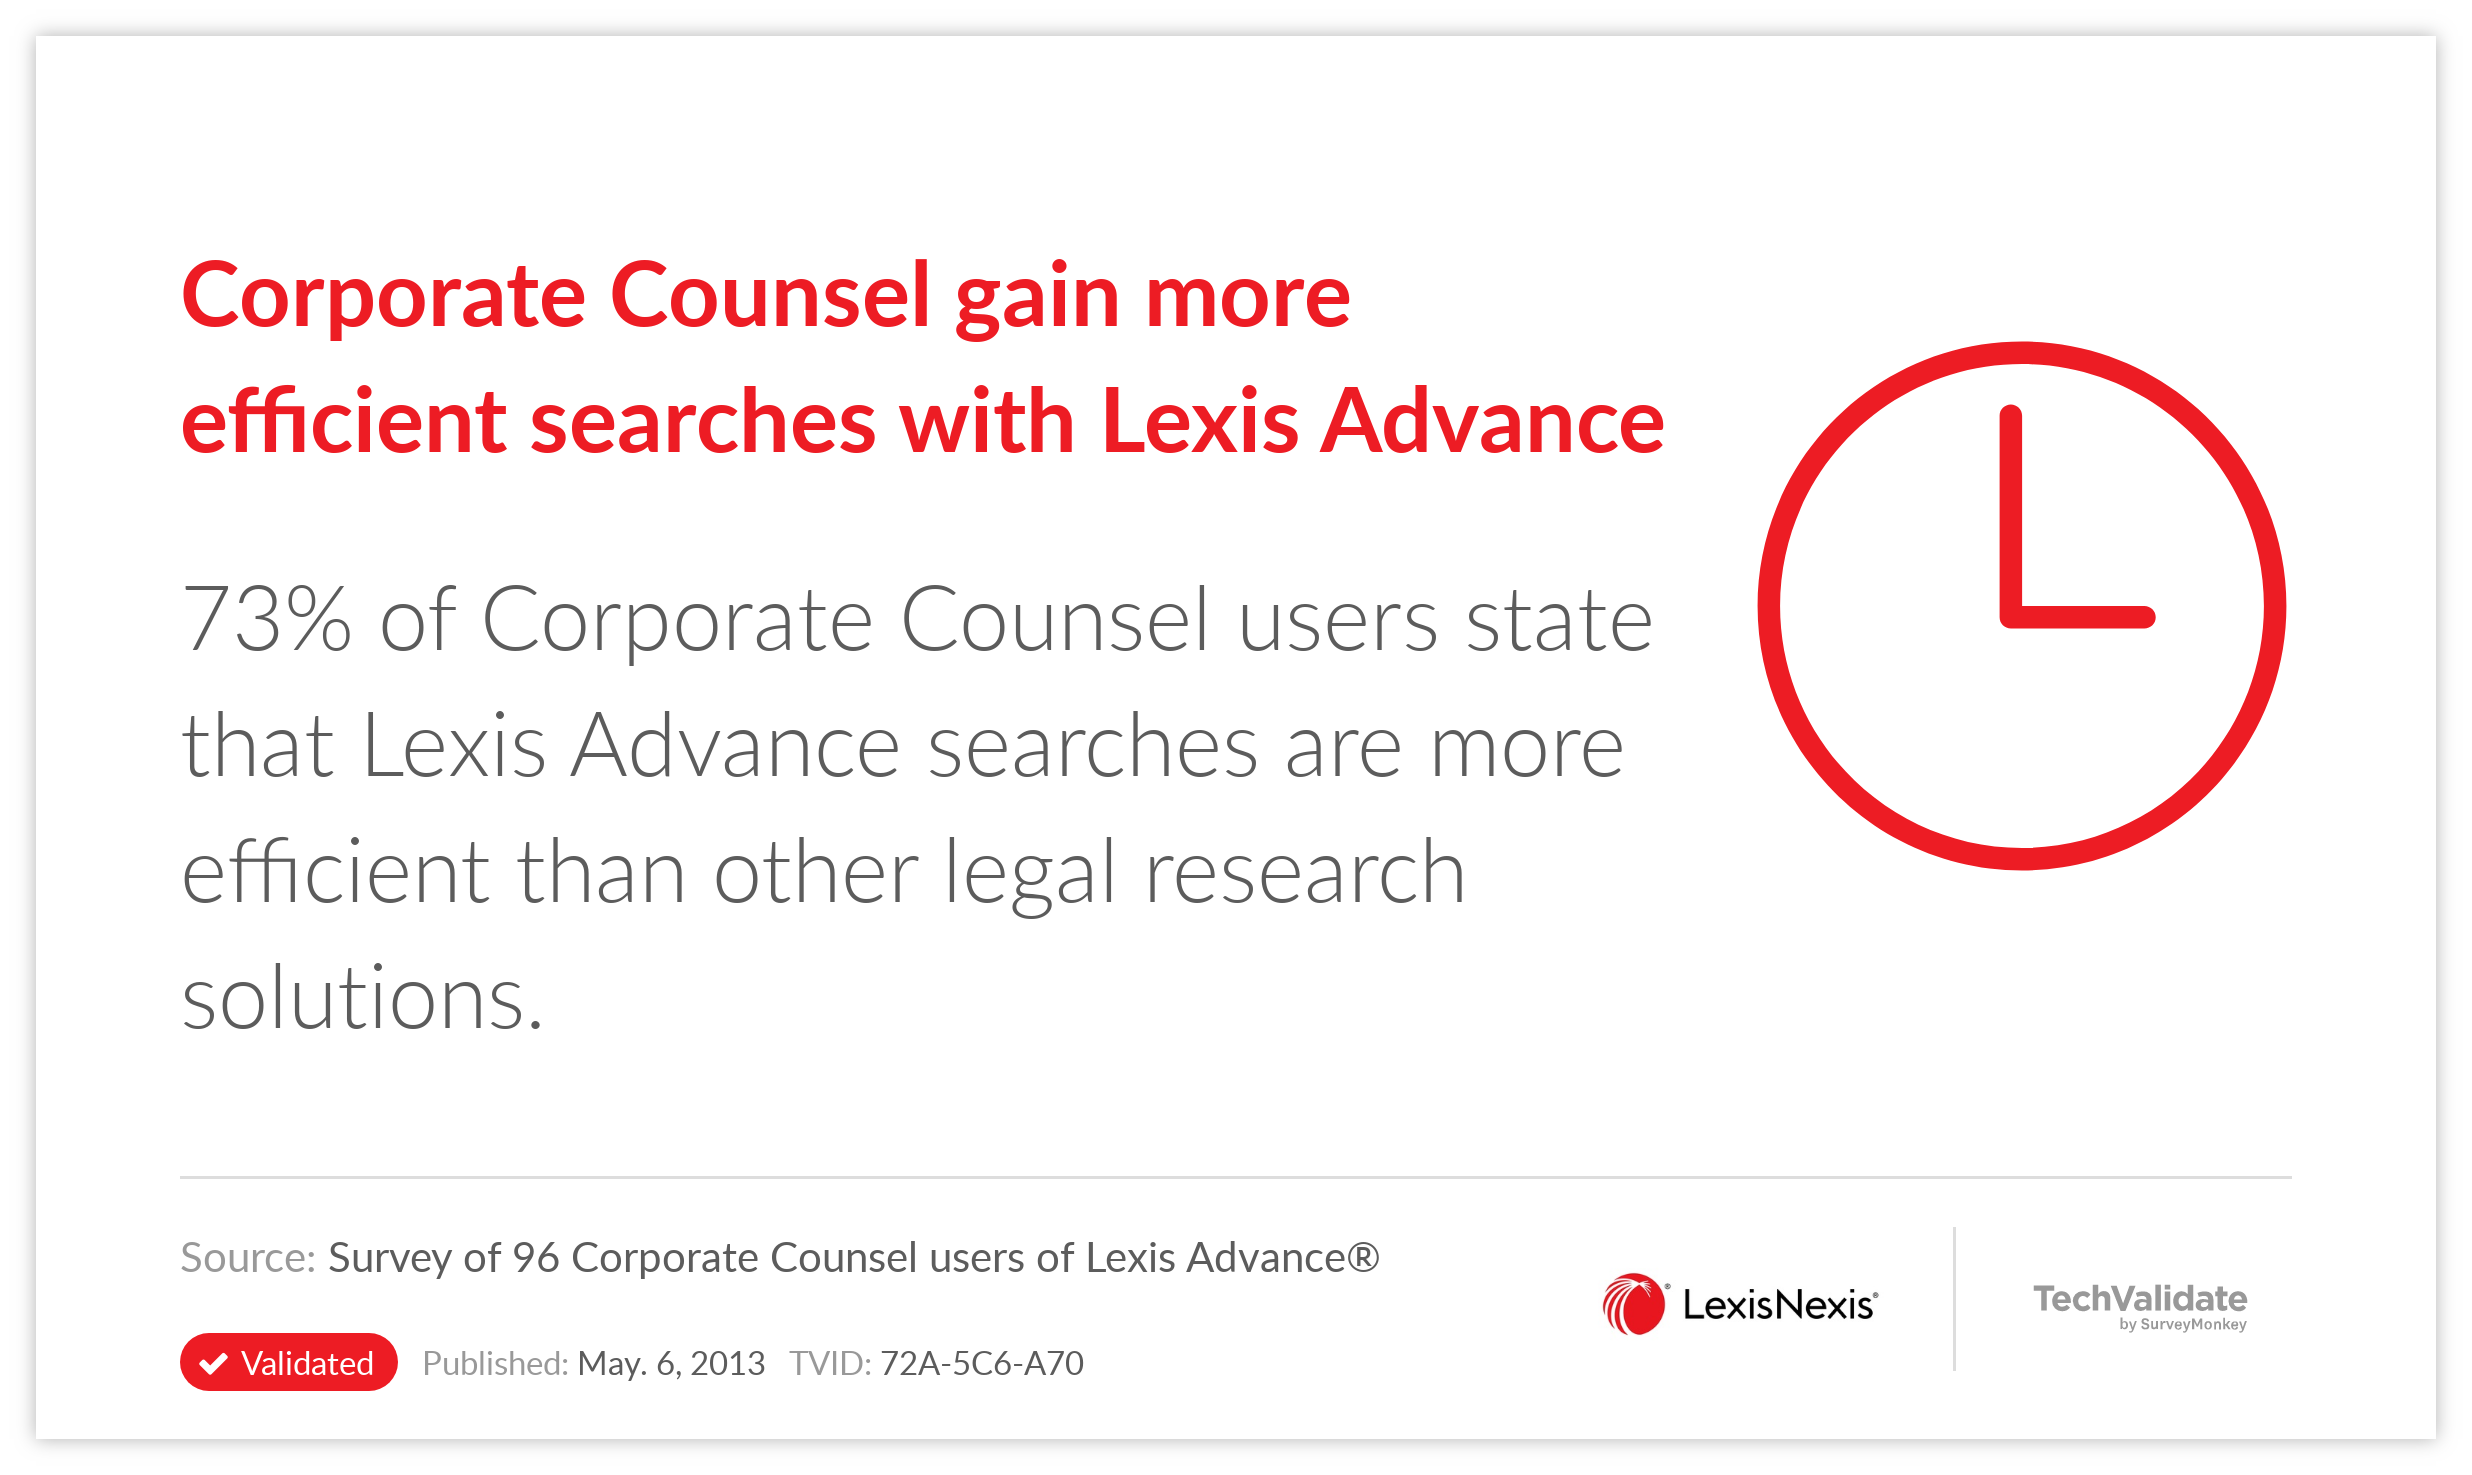 Corporate Counsel gain more efficient searches with Lexis Advance